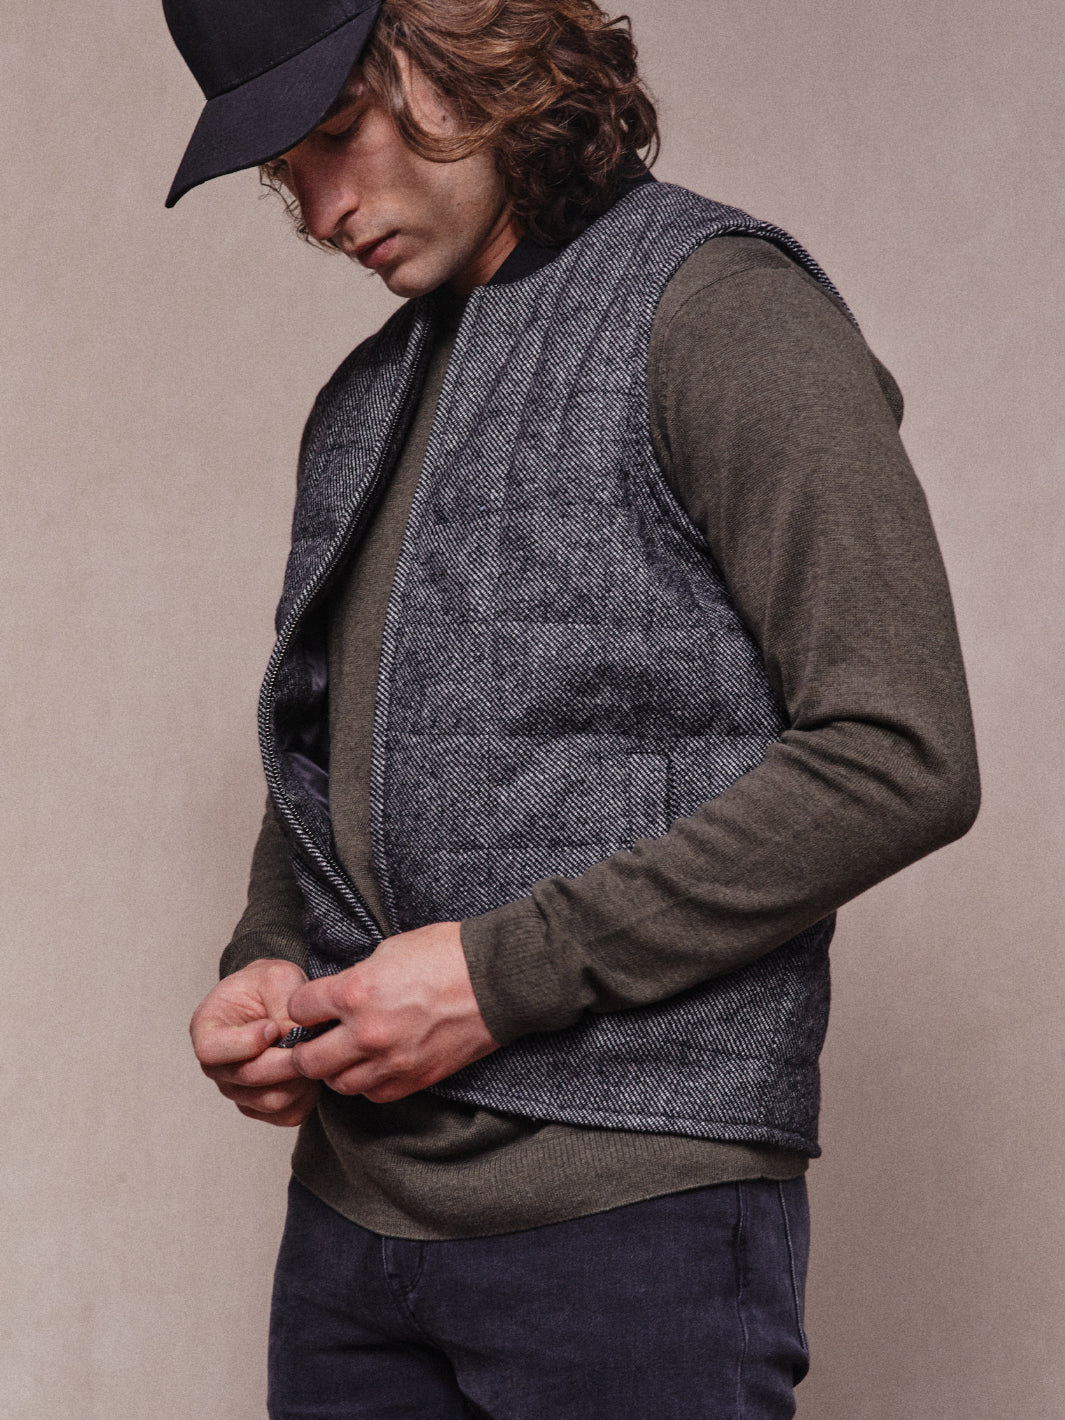 Model wearing Khaki Crew and zipping up Quilted Vest in Charcoal